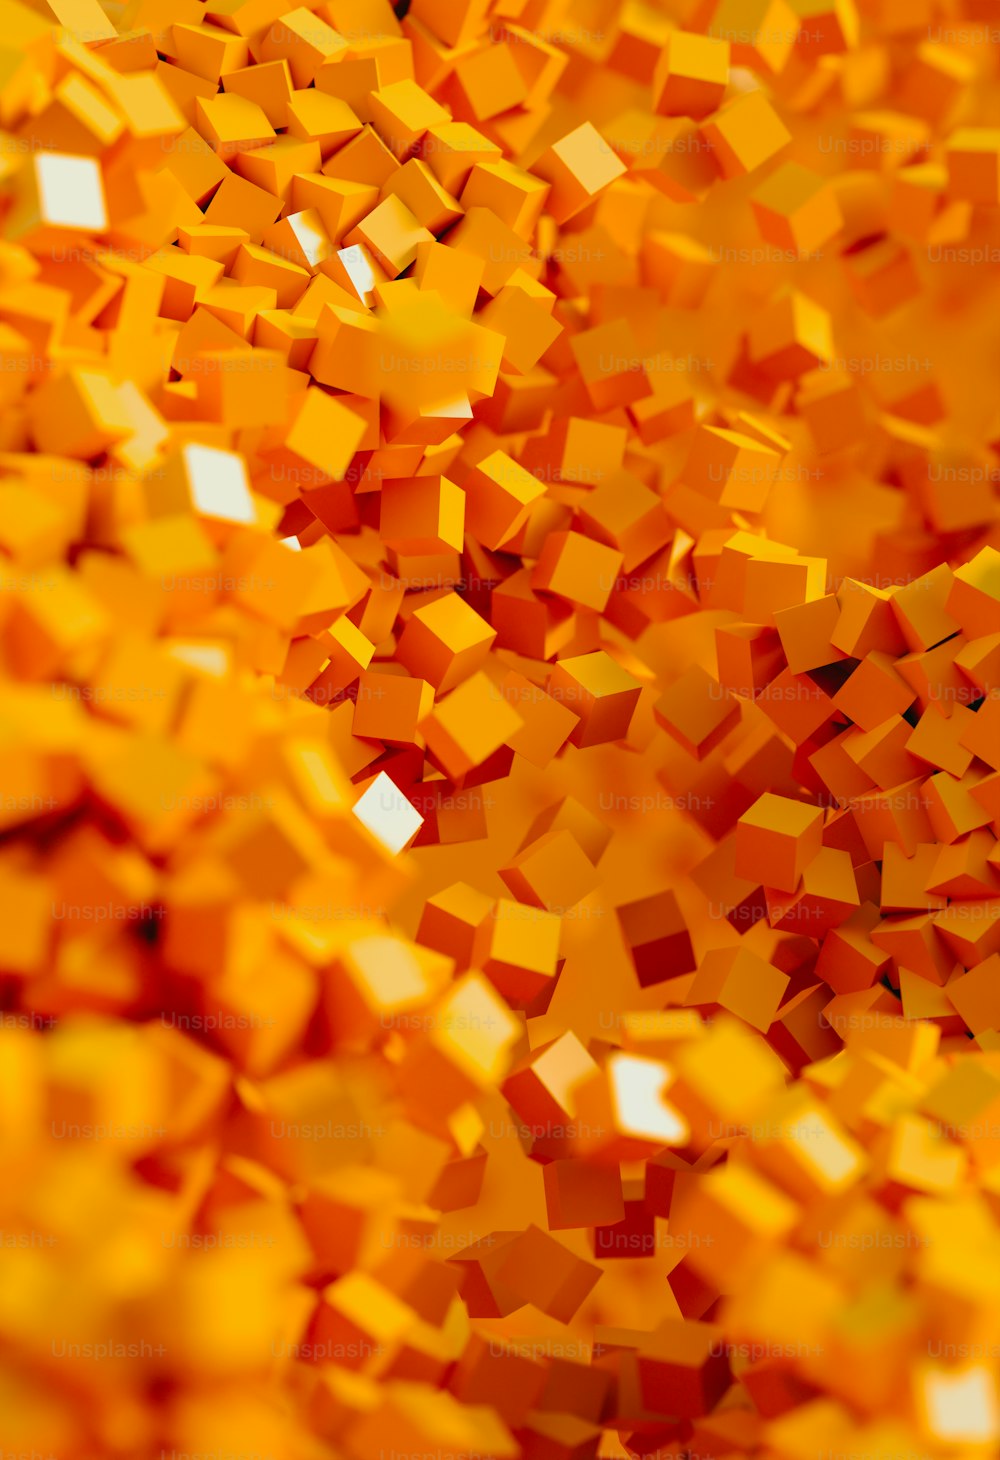 a large pile of orange cubes on a white surface